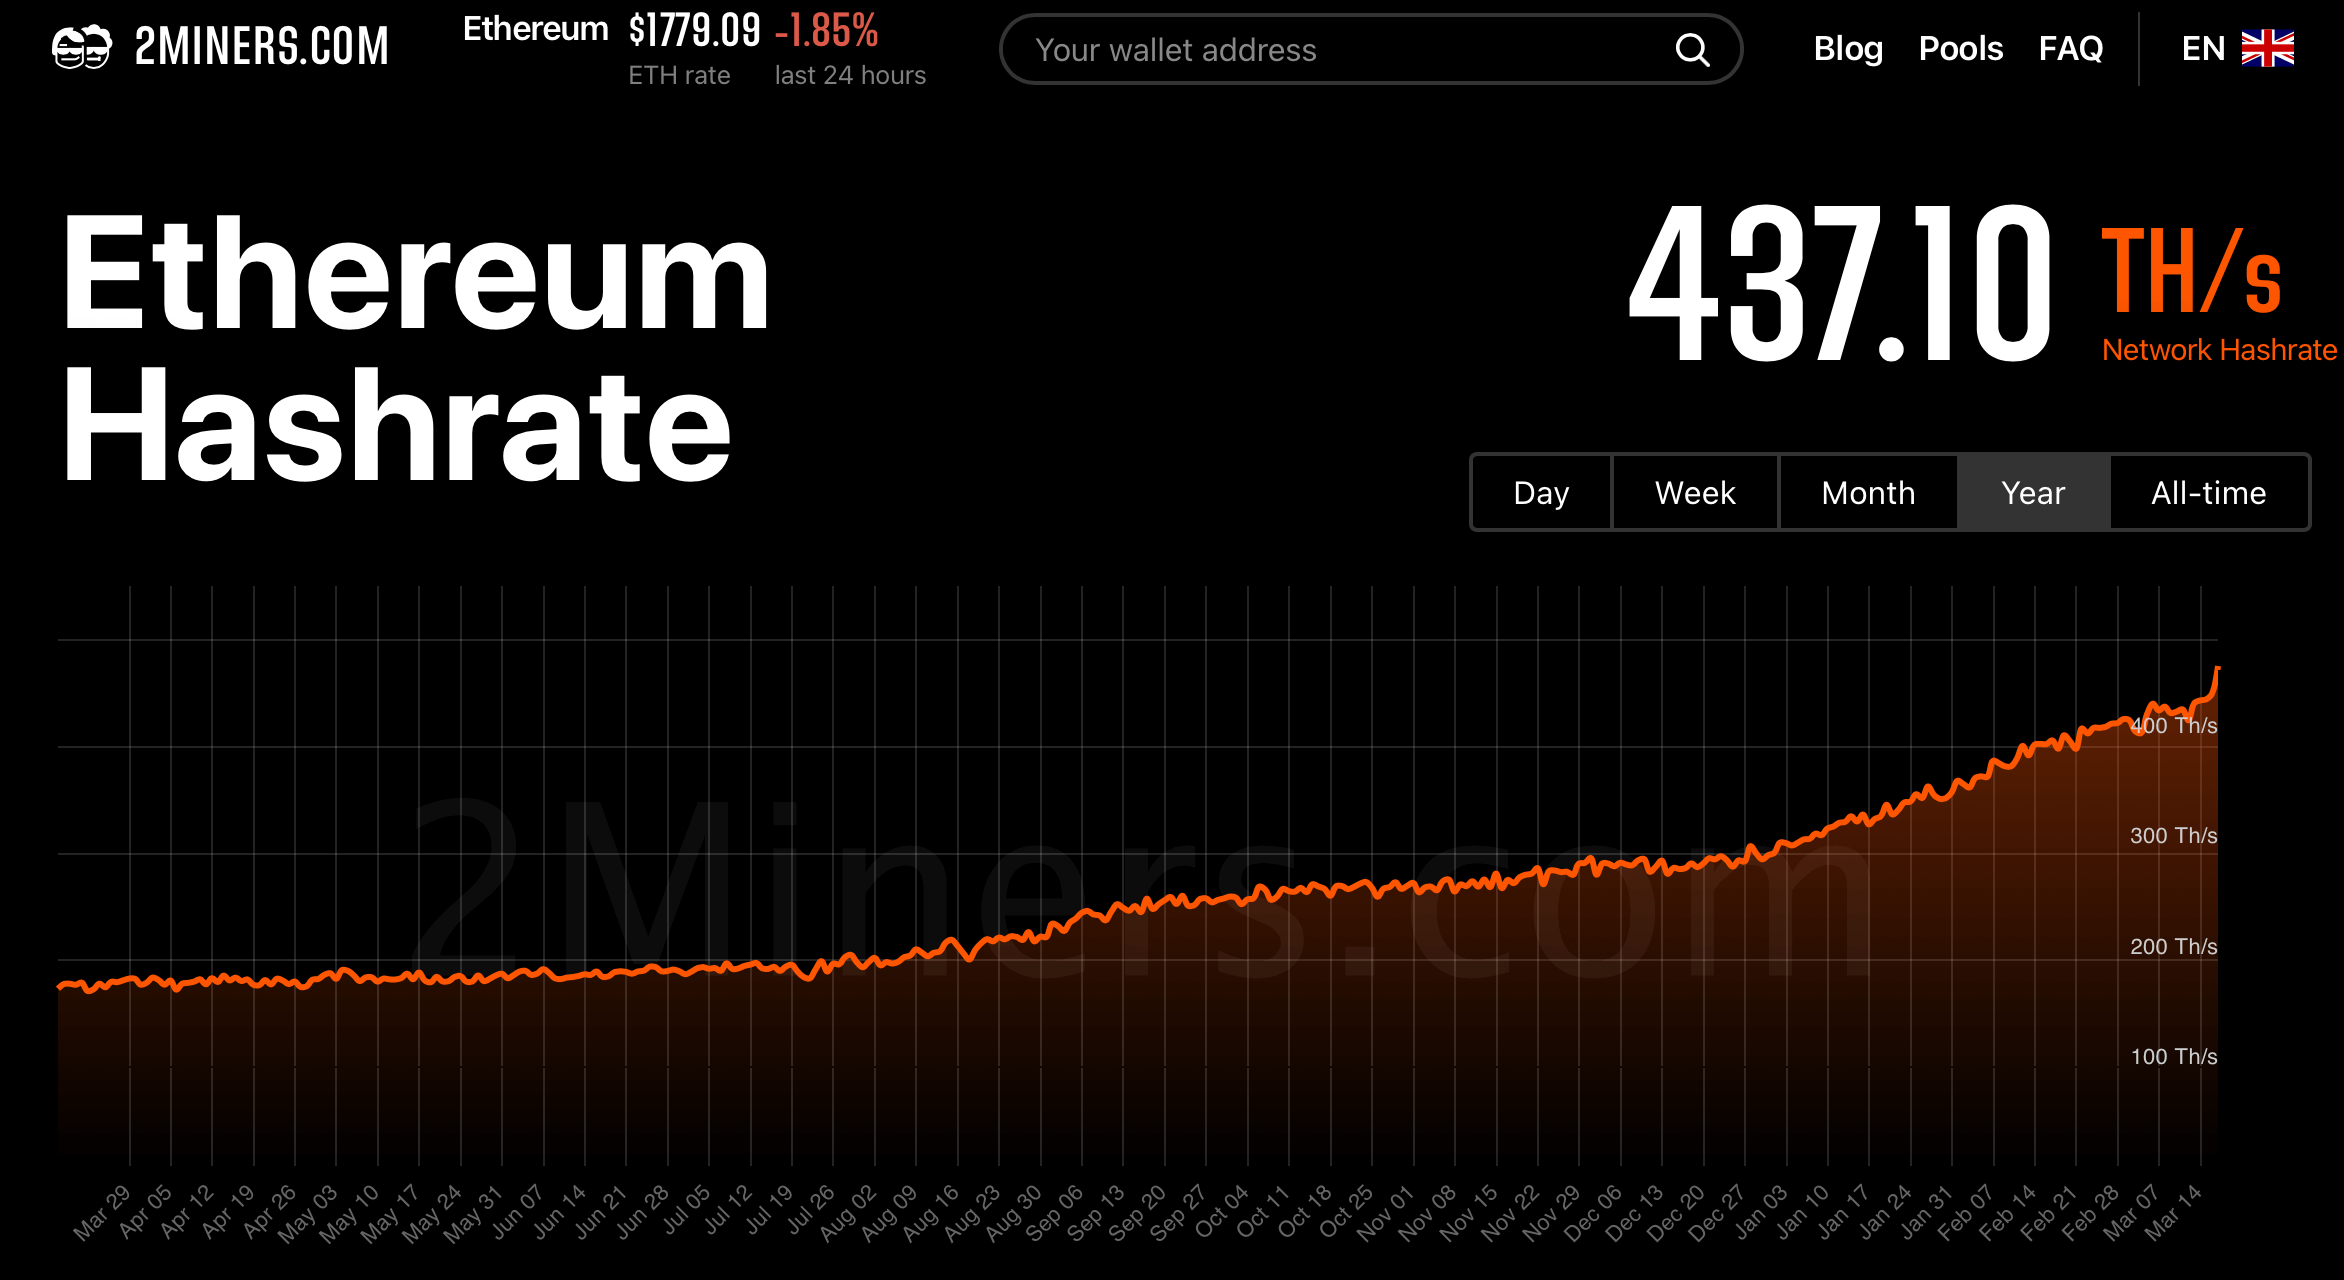 Ethereum good hashrate odds on the game tonight